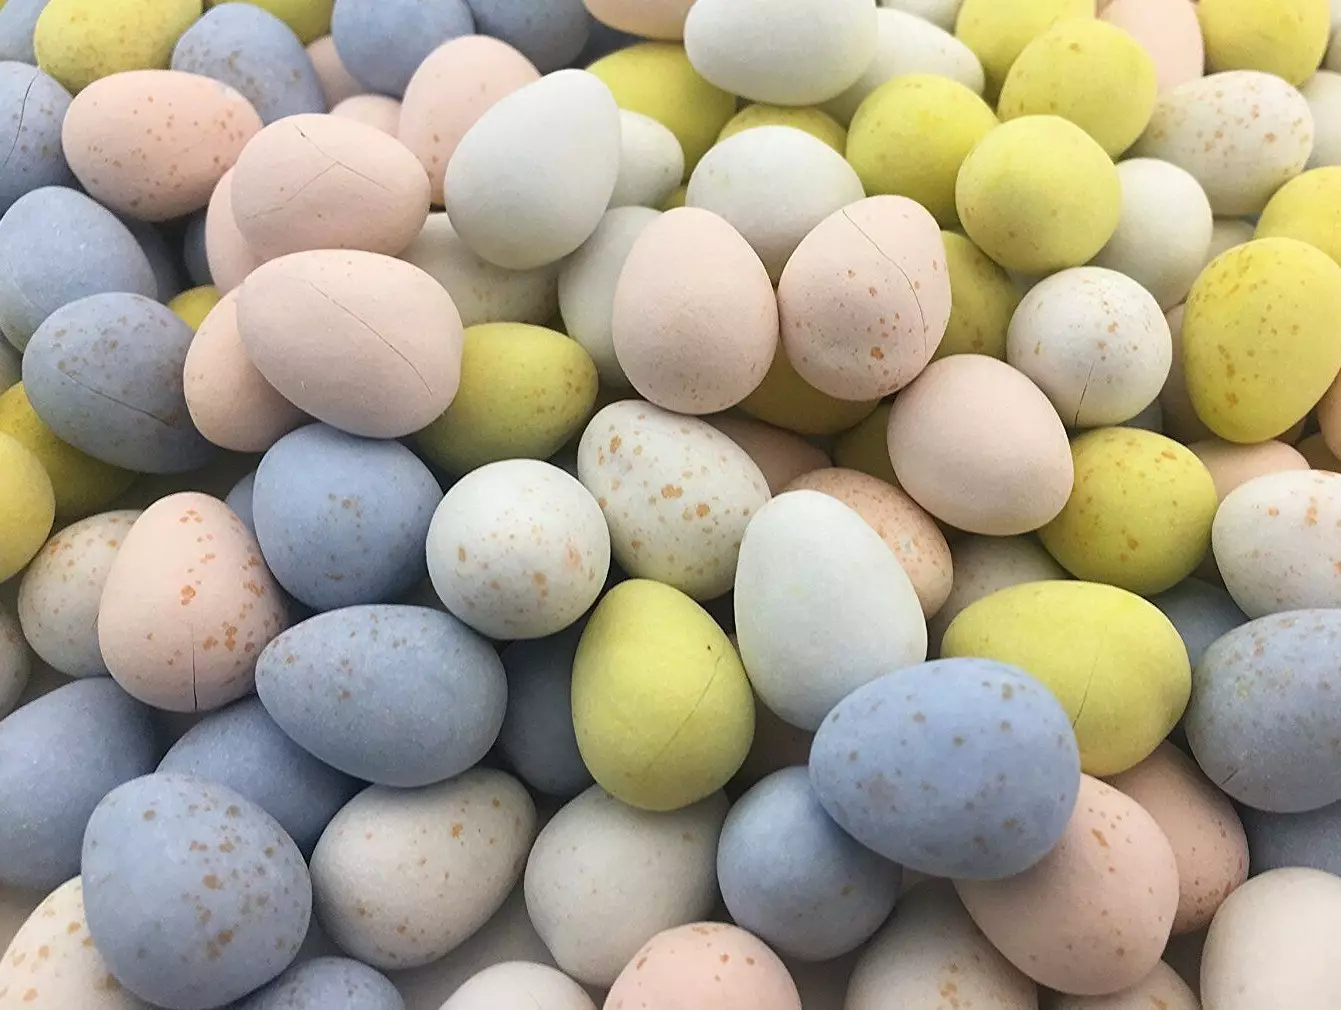 The style combines pastel tones of shell pink, powder blue and sherbet yellow, just like a Mini Egg selection.